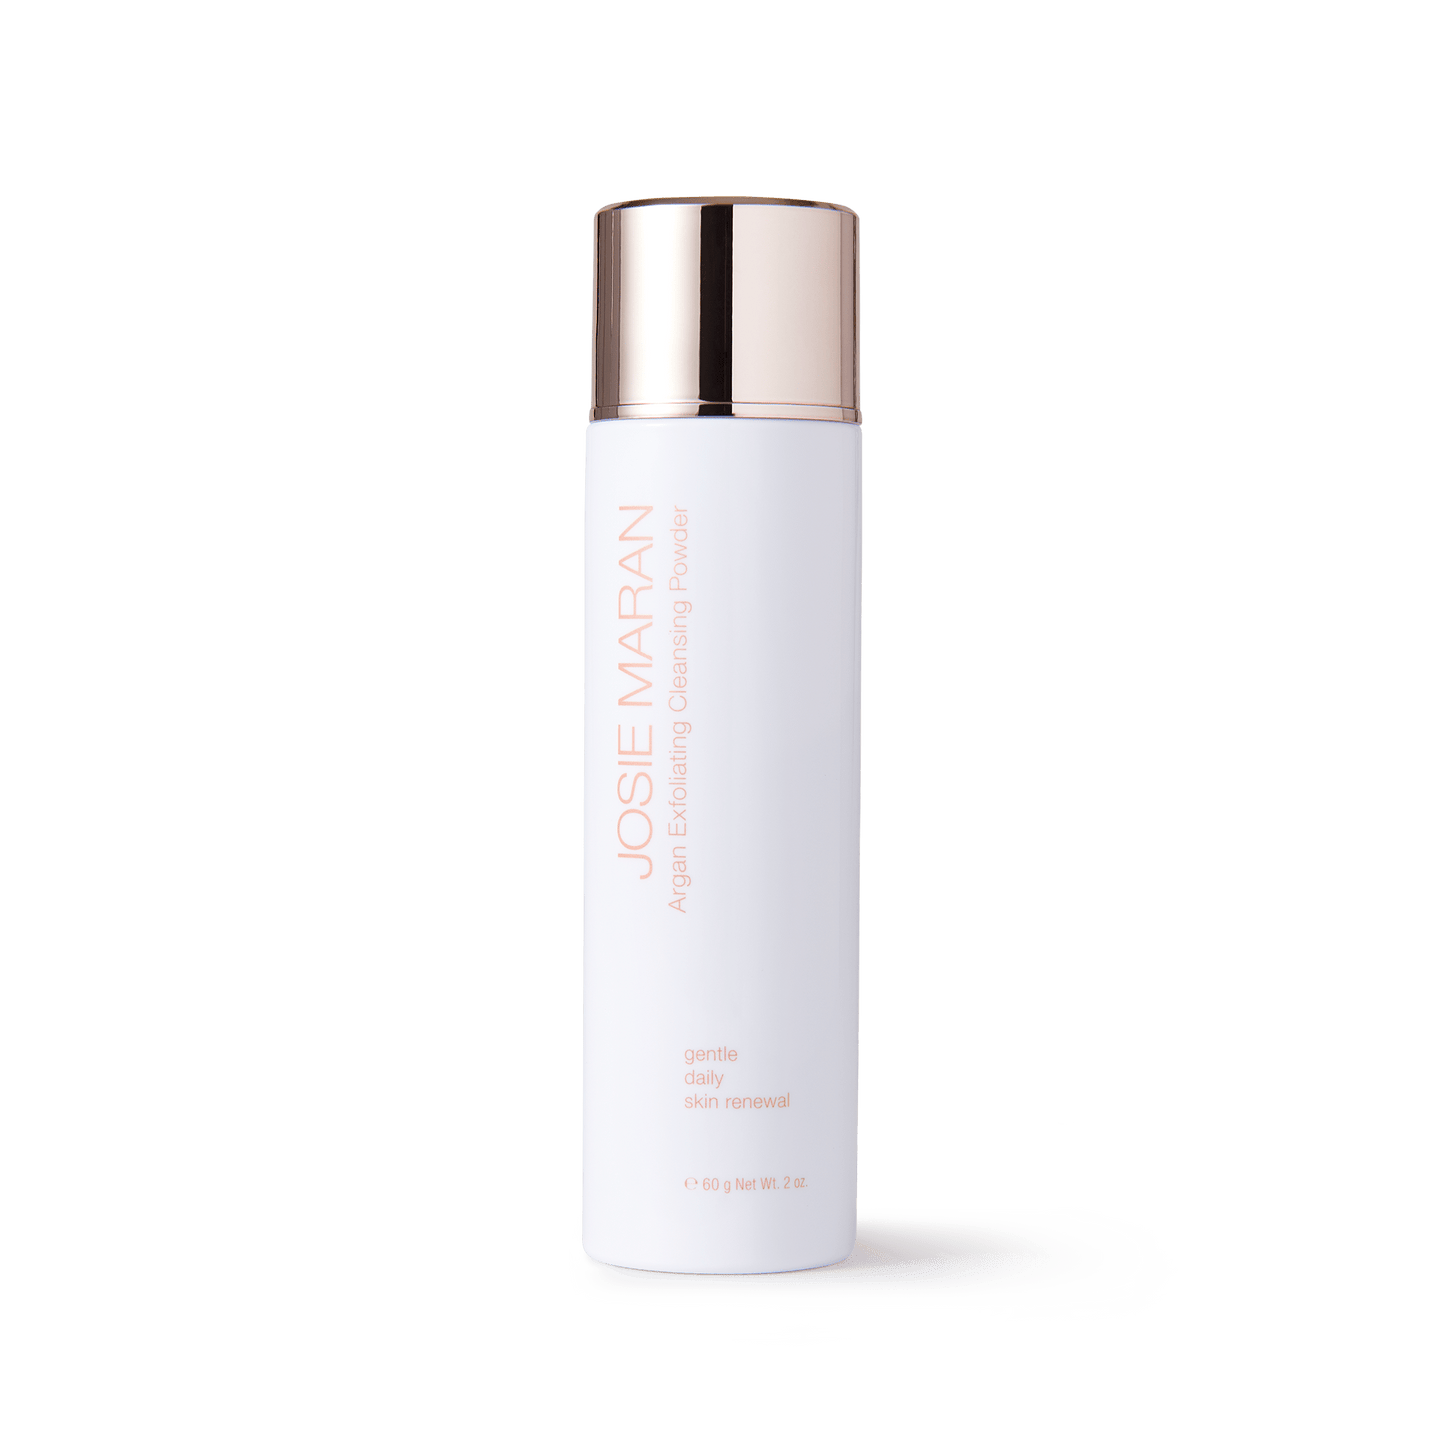 Josie Maran Argan Exfoliating Cleansing Powder - Gently Lifts Dead Skin for Brighter, Softer and More Youthful-Looking Skin (60g/2oz)